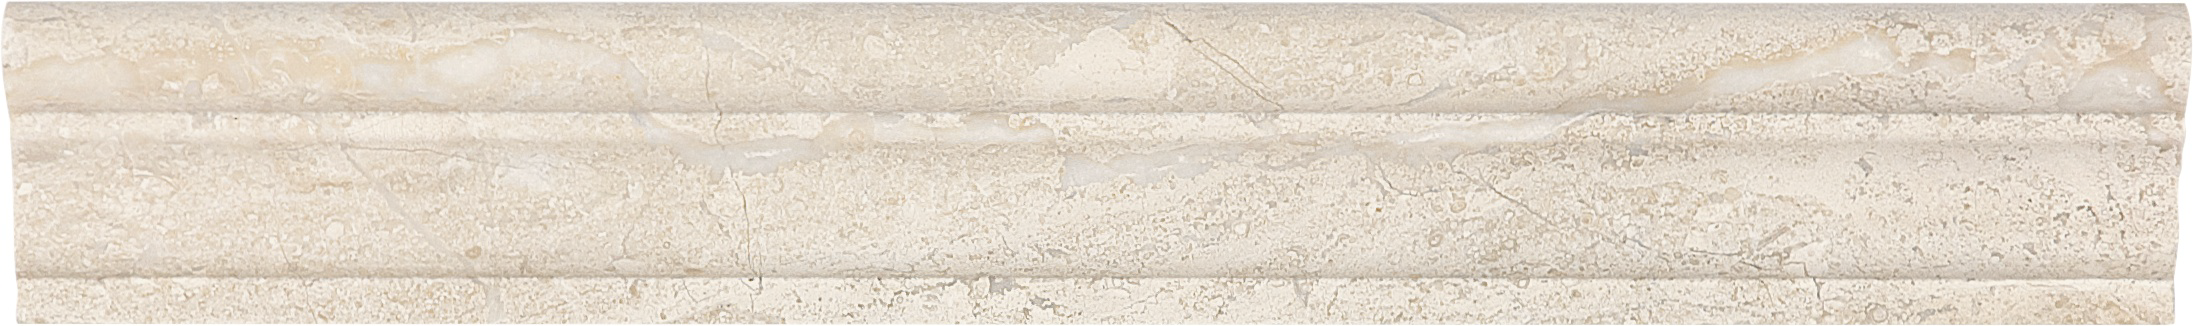 marble pattern natural stone chairrail molding from impero reale anatolia collection distributed by surface group international polished finish straight edge edge 2x12 bar shape